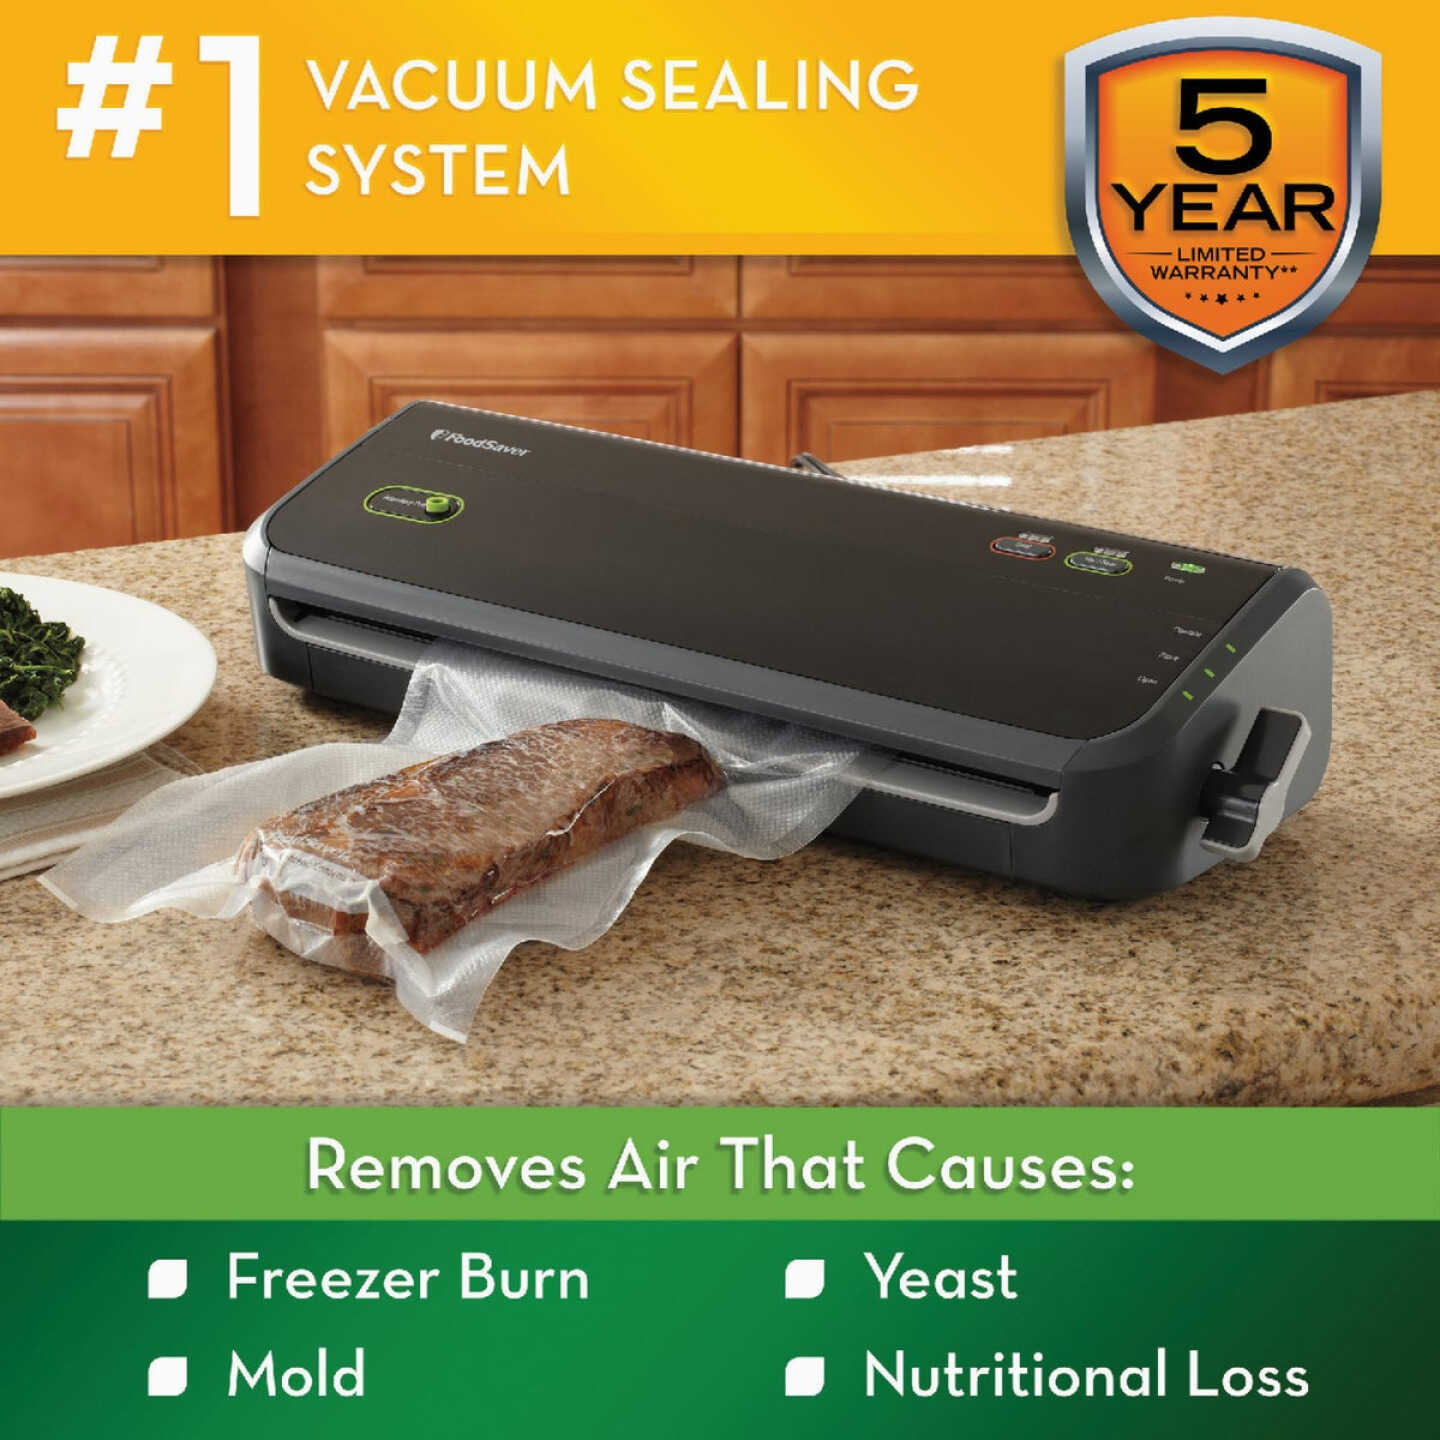 FoodSaver Everyday Vacuum Sealer Machine | Keeps Food Fresh Up to 5x  Longer* | Compact Design For Efficient Storage | With 5 x Vacuum Sealer  Bags